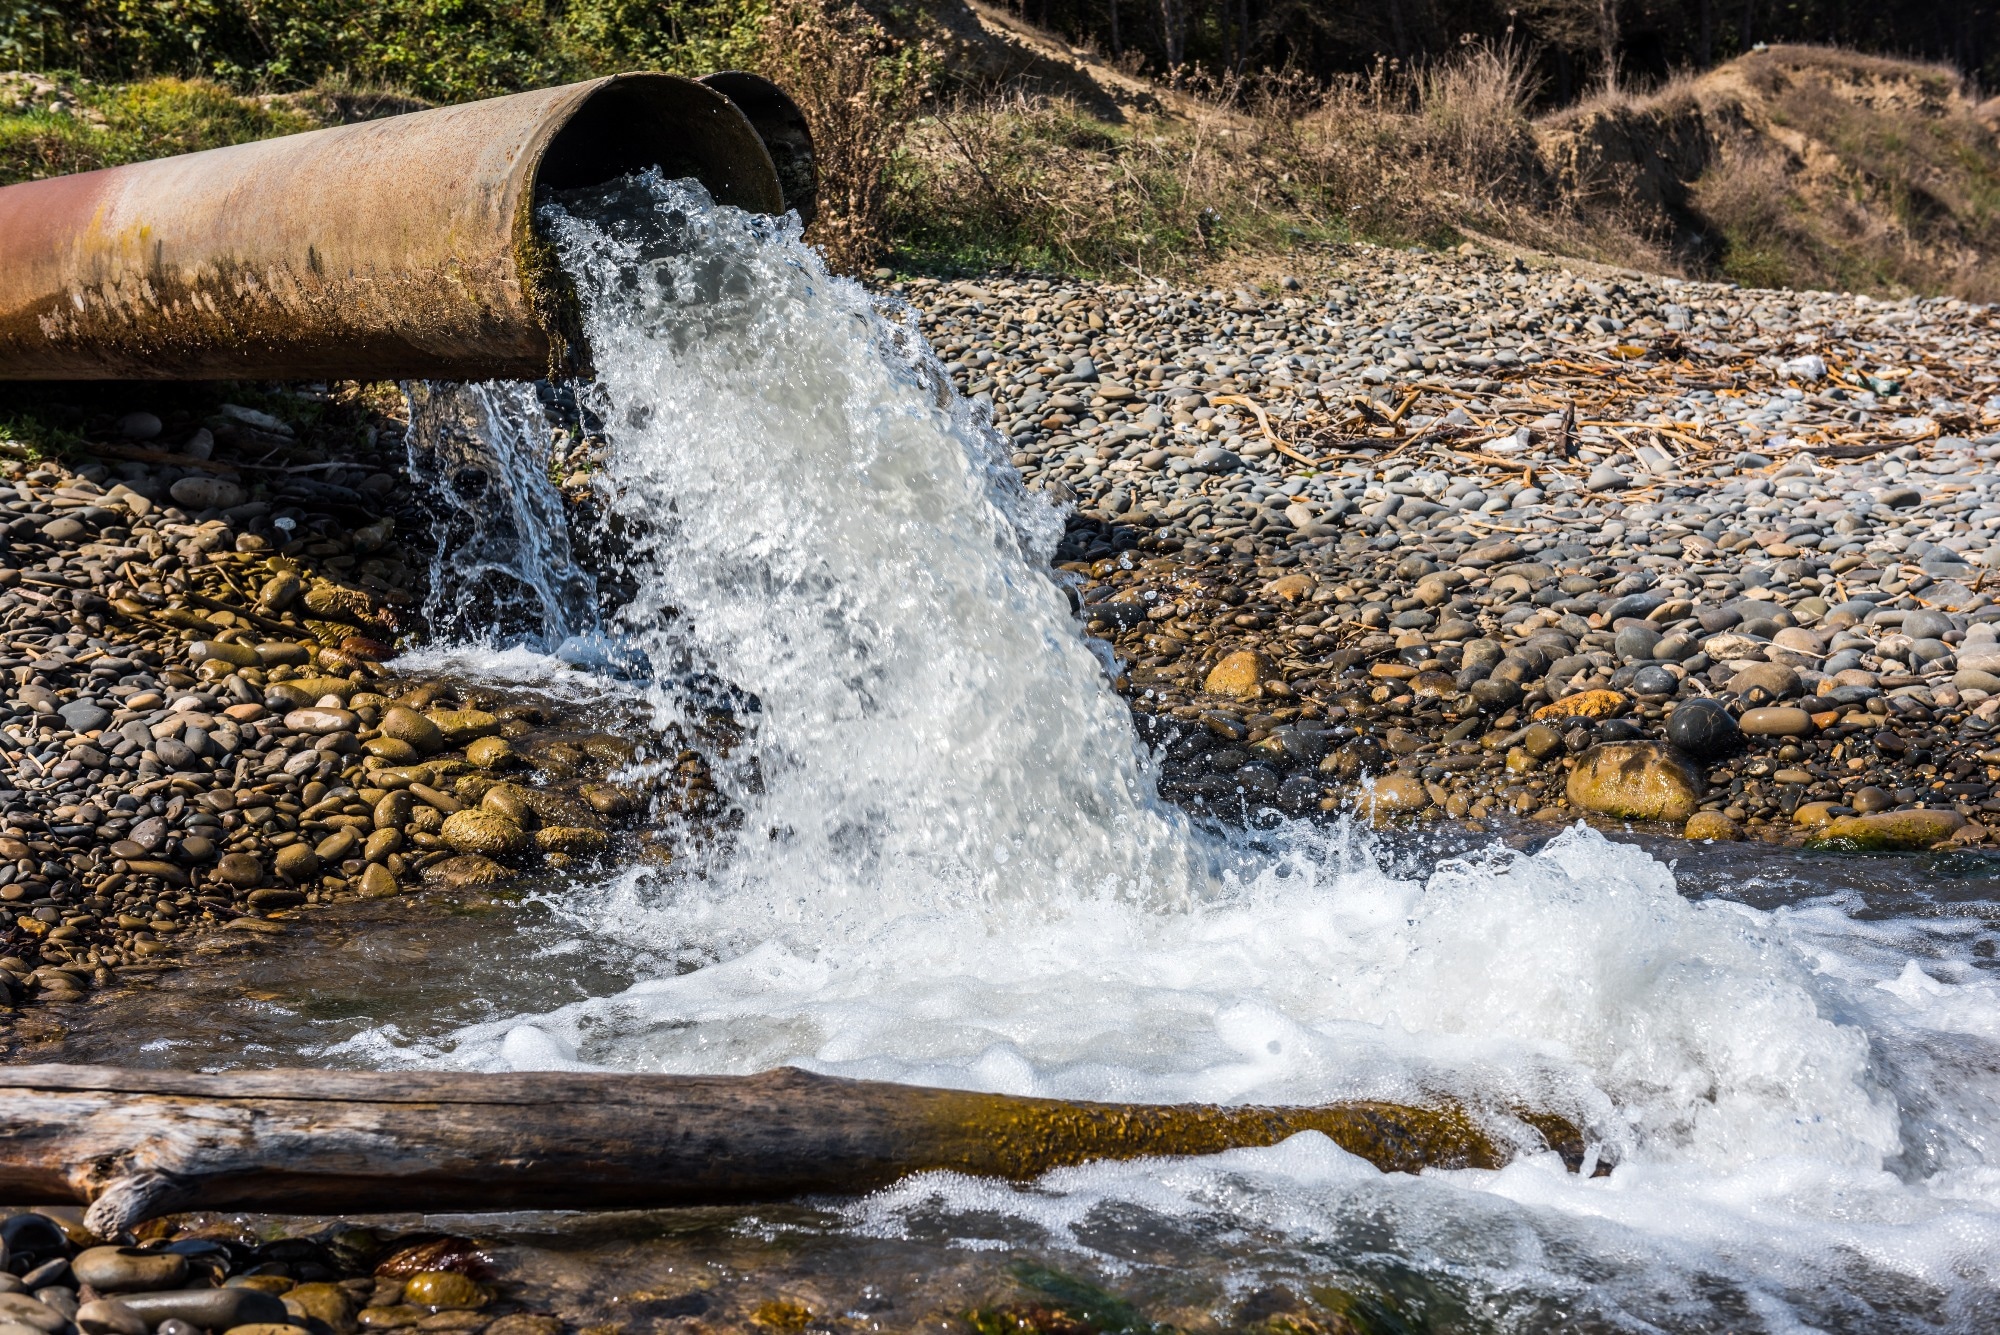 Study: The feasibility of SARS-CoV-2 surveillance using wastewater and environmental sampling in Indonesia. Image Credit: Vastram/Shutterstock